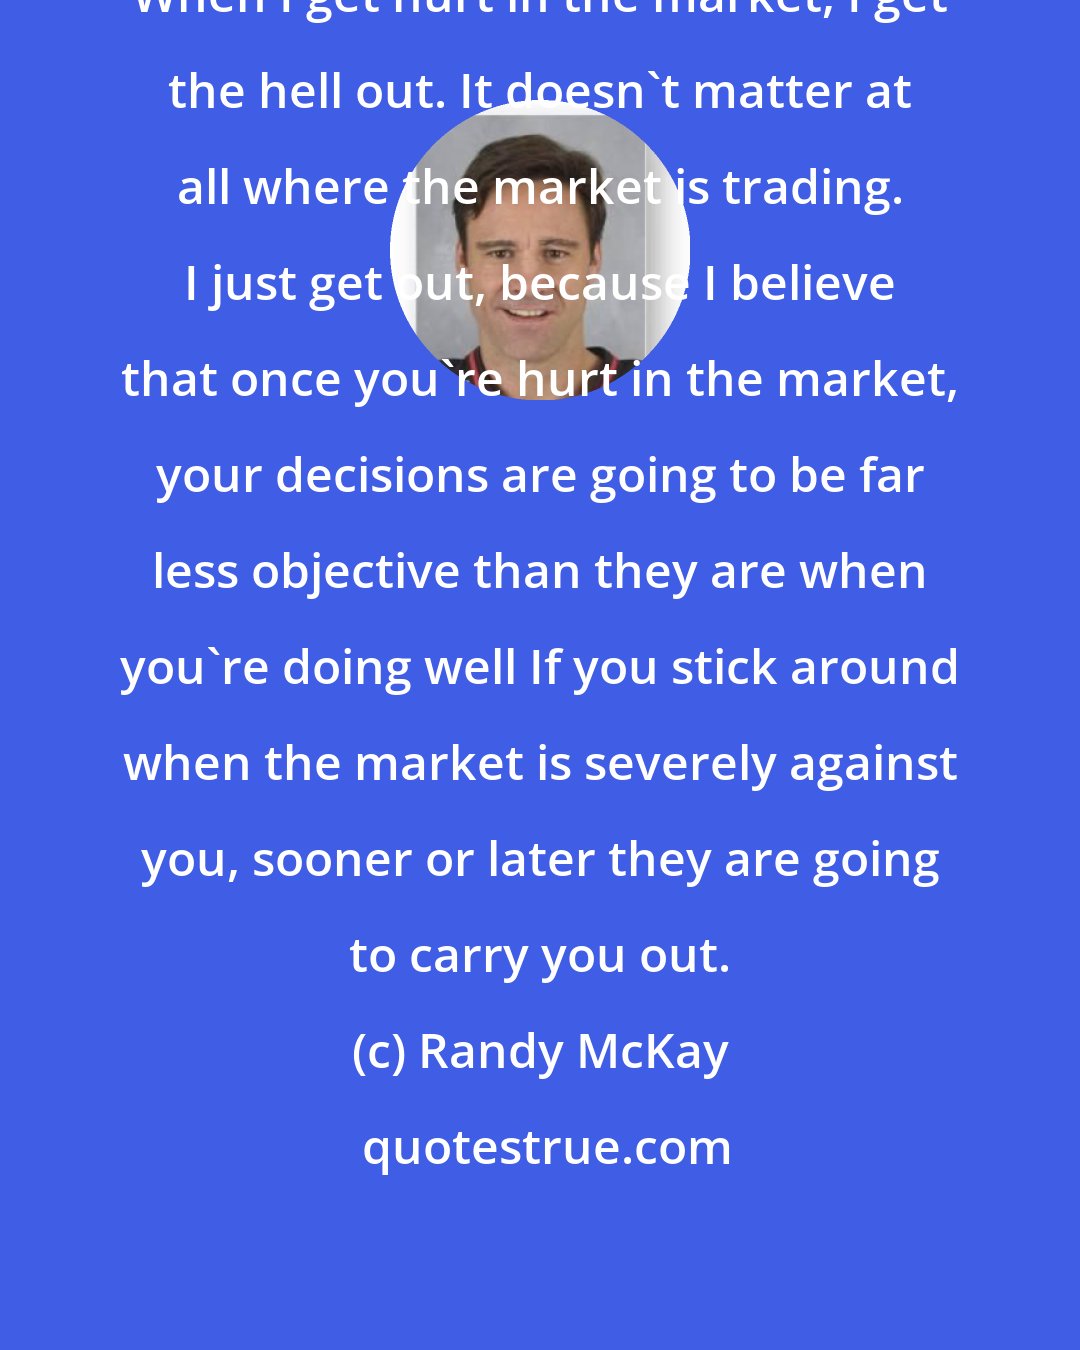 Randy McKay: When I get hurt in the market, I get the hell out. It doesn't matter at all where the market is trading. I just get out, because I believe that once you're hurt in the market, your decisions are going to be far less objective than they are when you're doing well If you stick around when the market is severely against you, sooner or later they are going to carry you out.